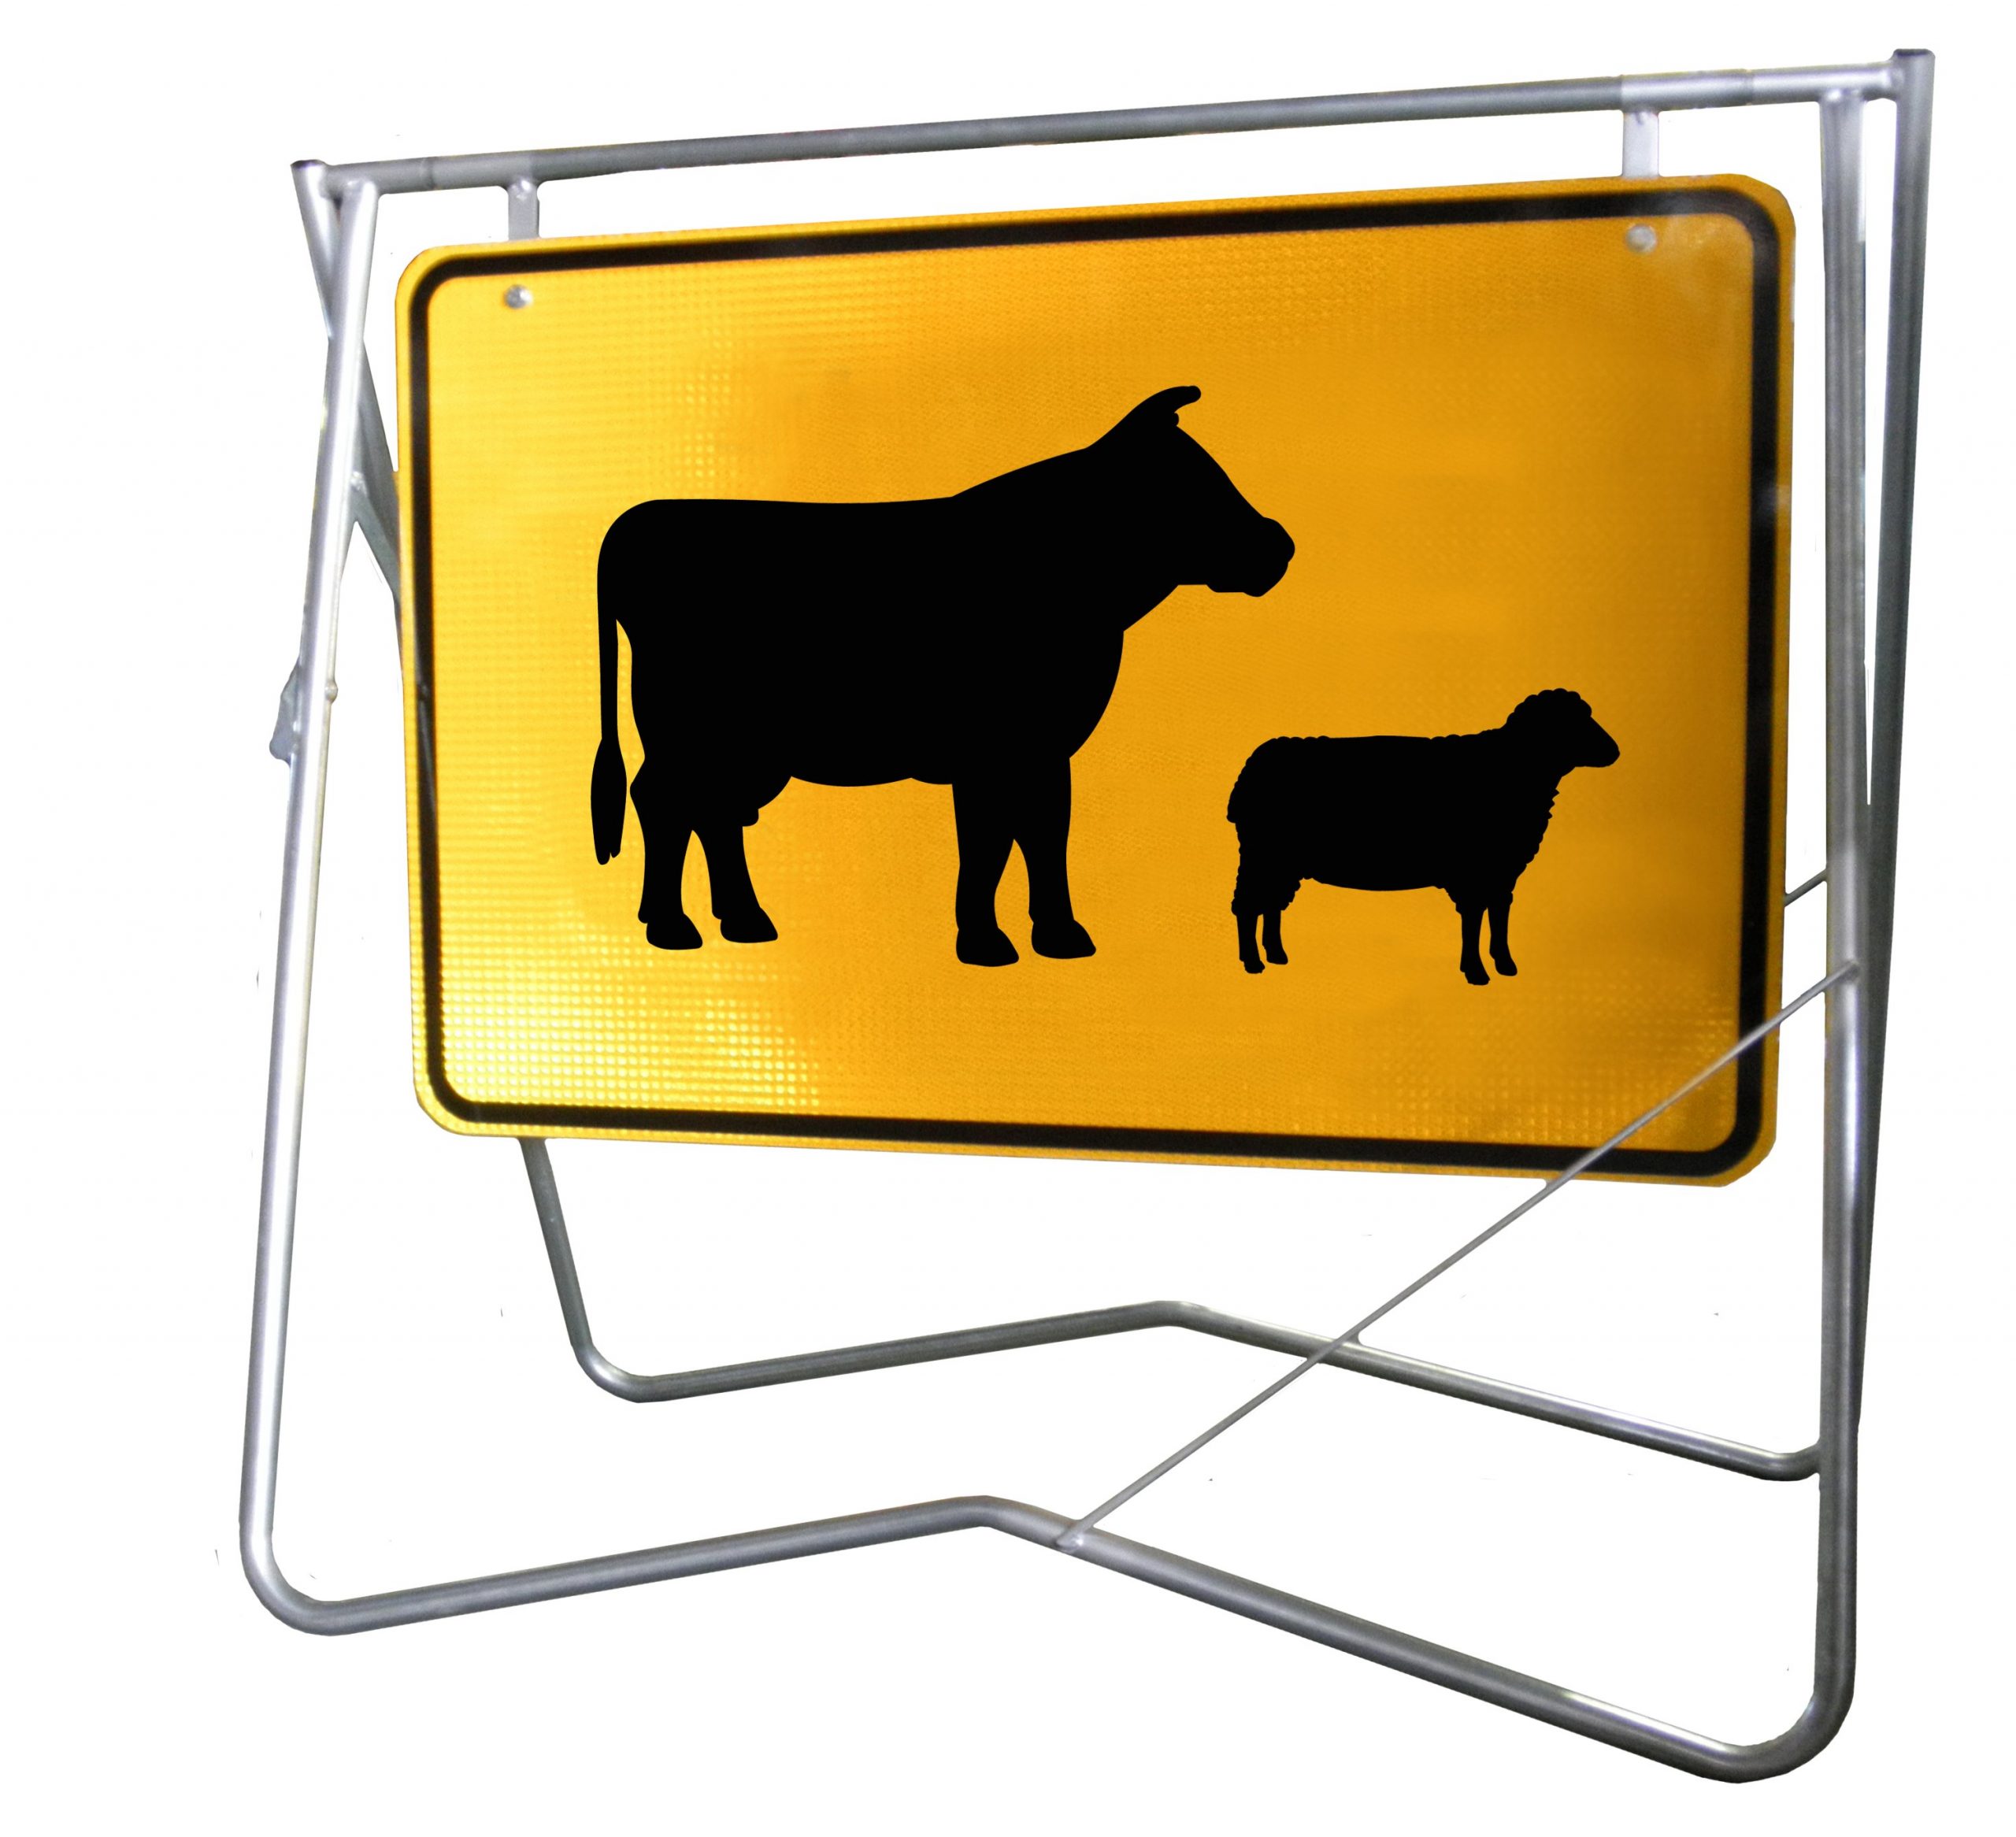 Stock Crossing (Symbolic) - 900 x 600 - Mounted on Swing Stand